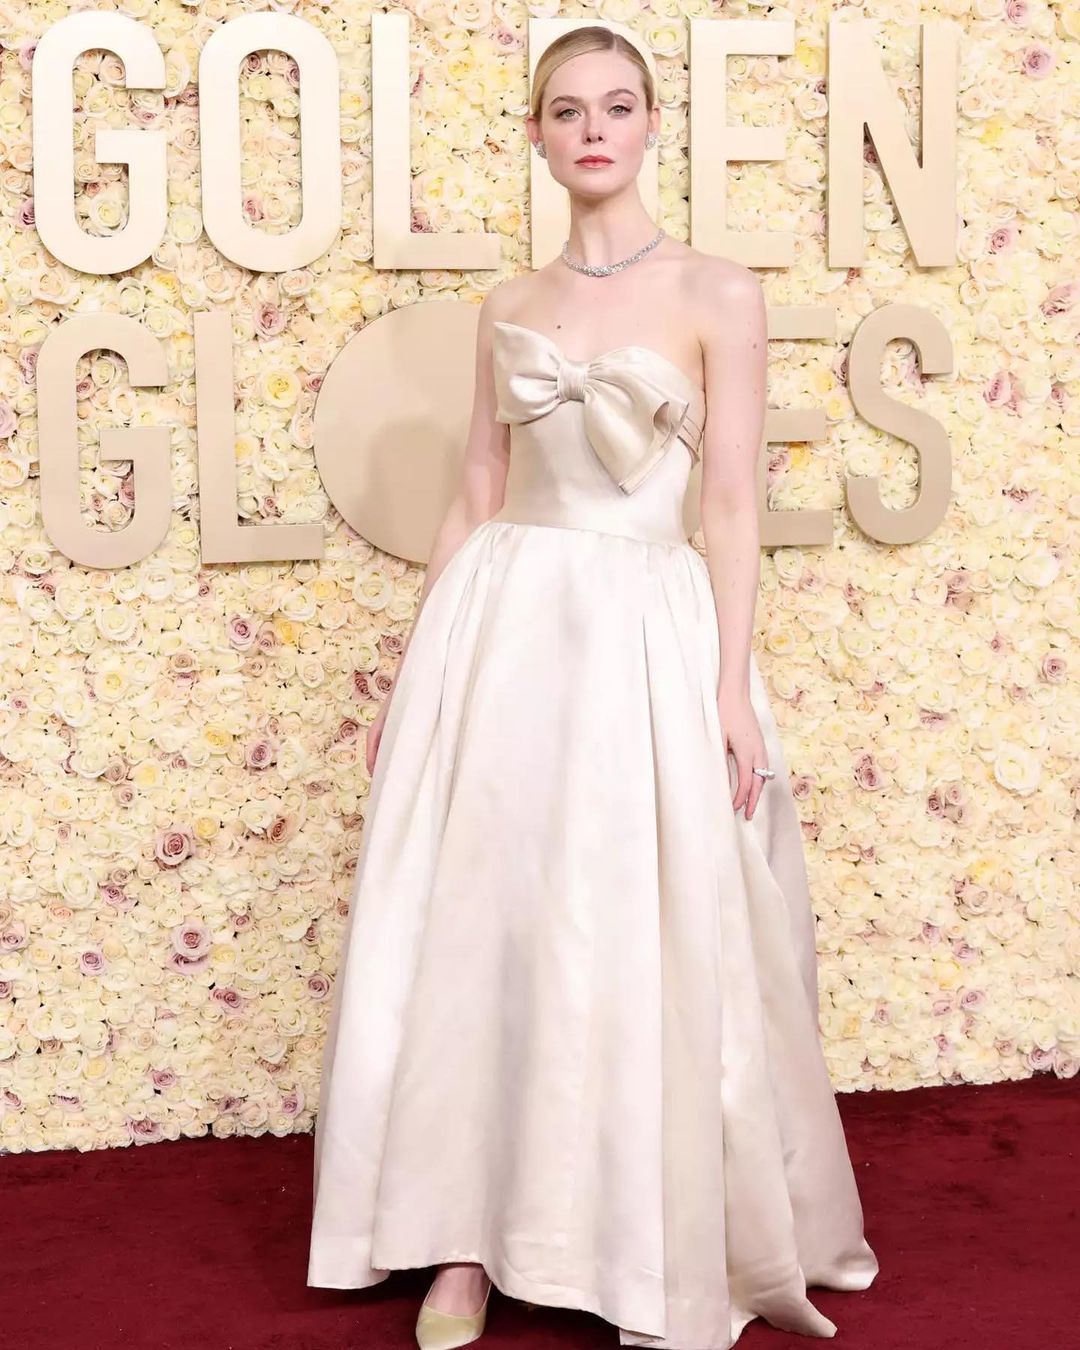 2.Elle Fanning wore a strapless gown by Pierre Balmain for her first time at the Golden Globes. The bow-accented gown was accessorized with diamond jewels by Cartier and Jimmy Choo’s Love pump.